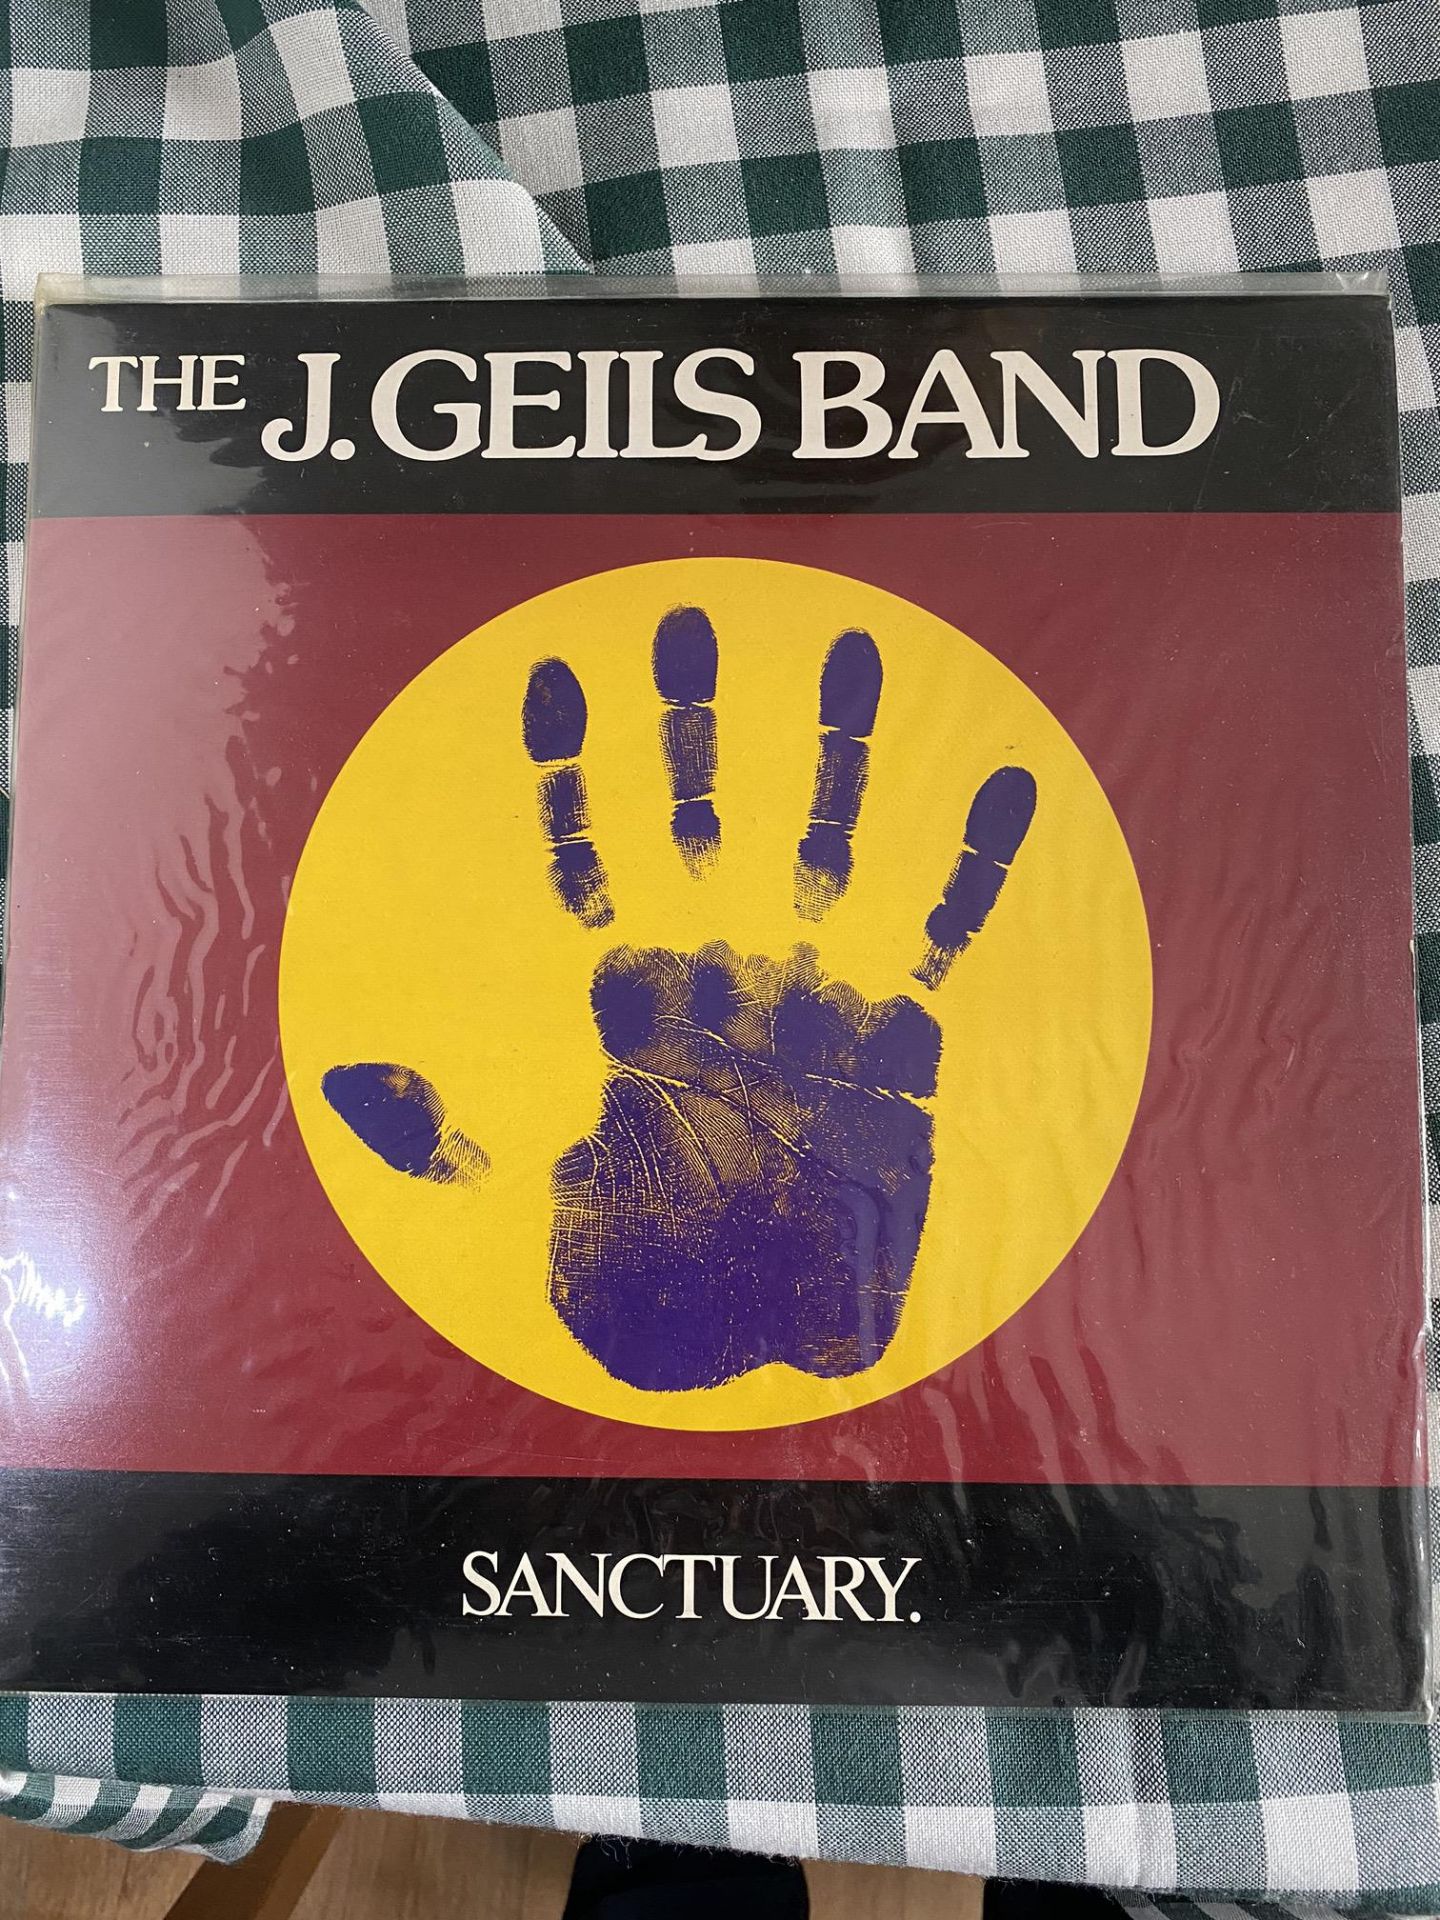 THE J GEILS BAND - SANCTUARY ALBUM - FROM PRIVATE COLLECTION